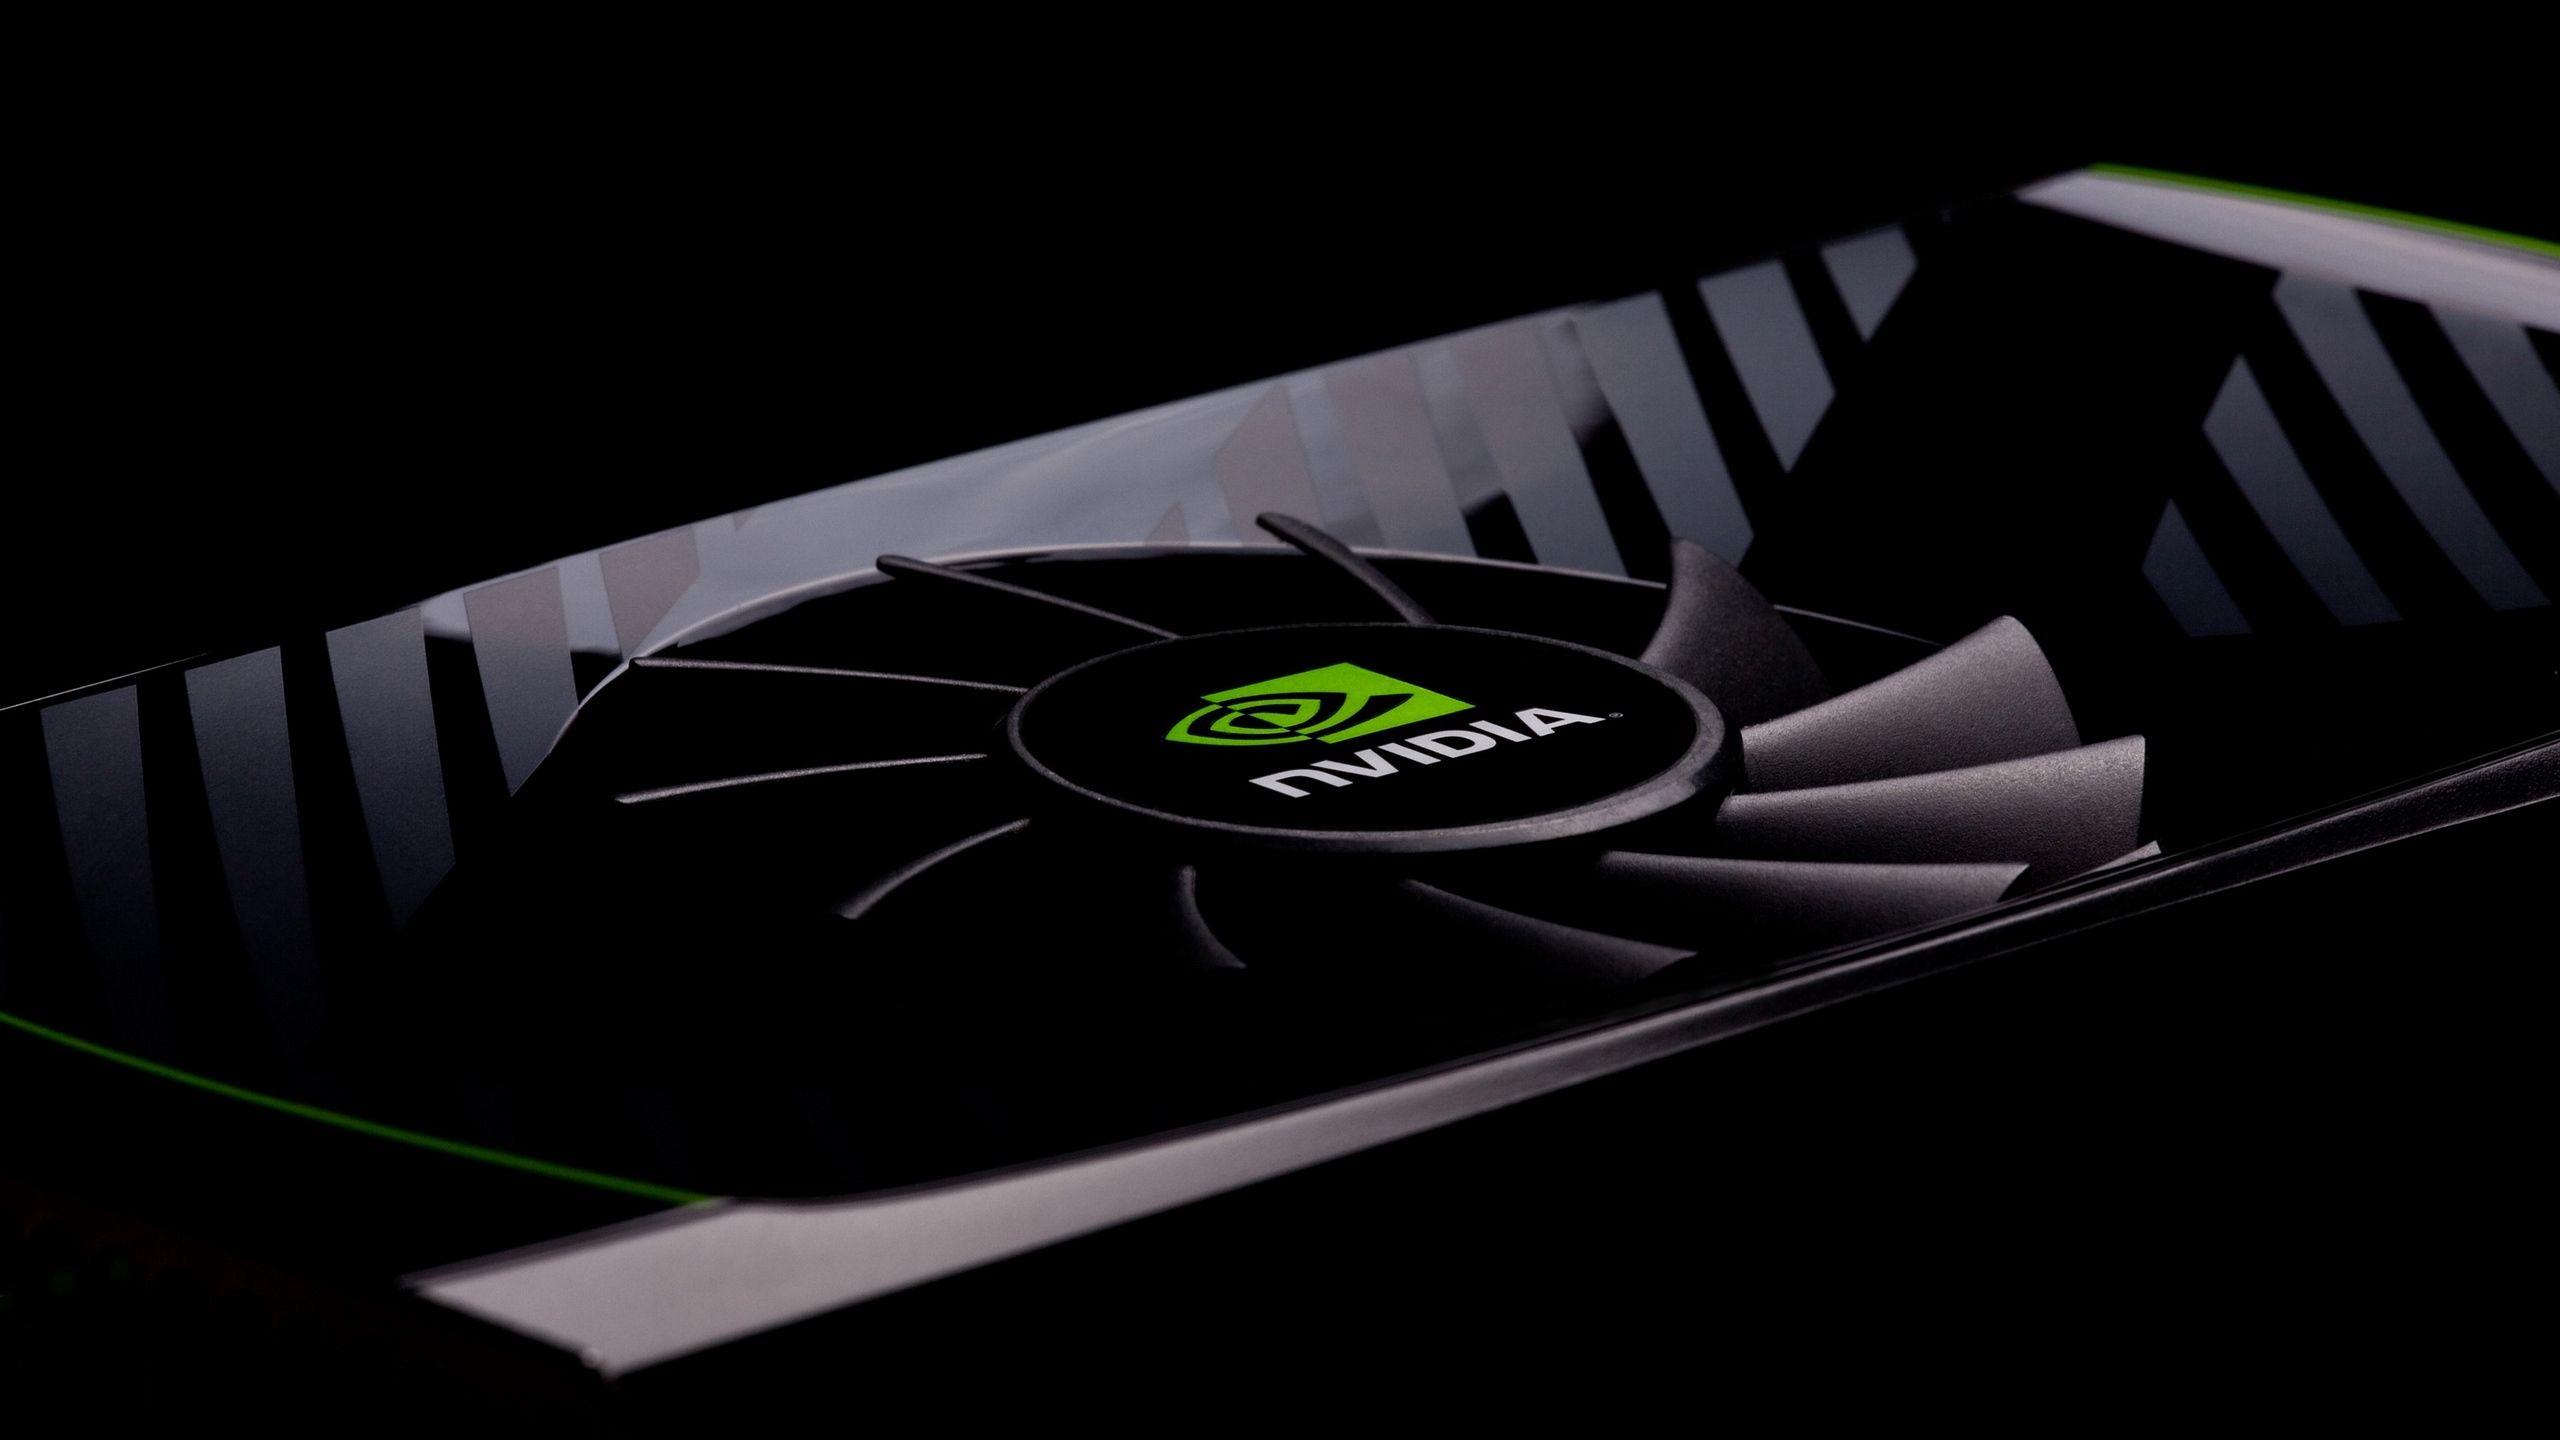 Nvidia 2560x1440 Wallpapers Top Free Nvidia 2560x1440 Backgrounds Wallpaperaccess